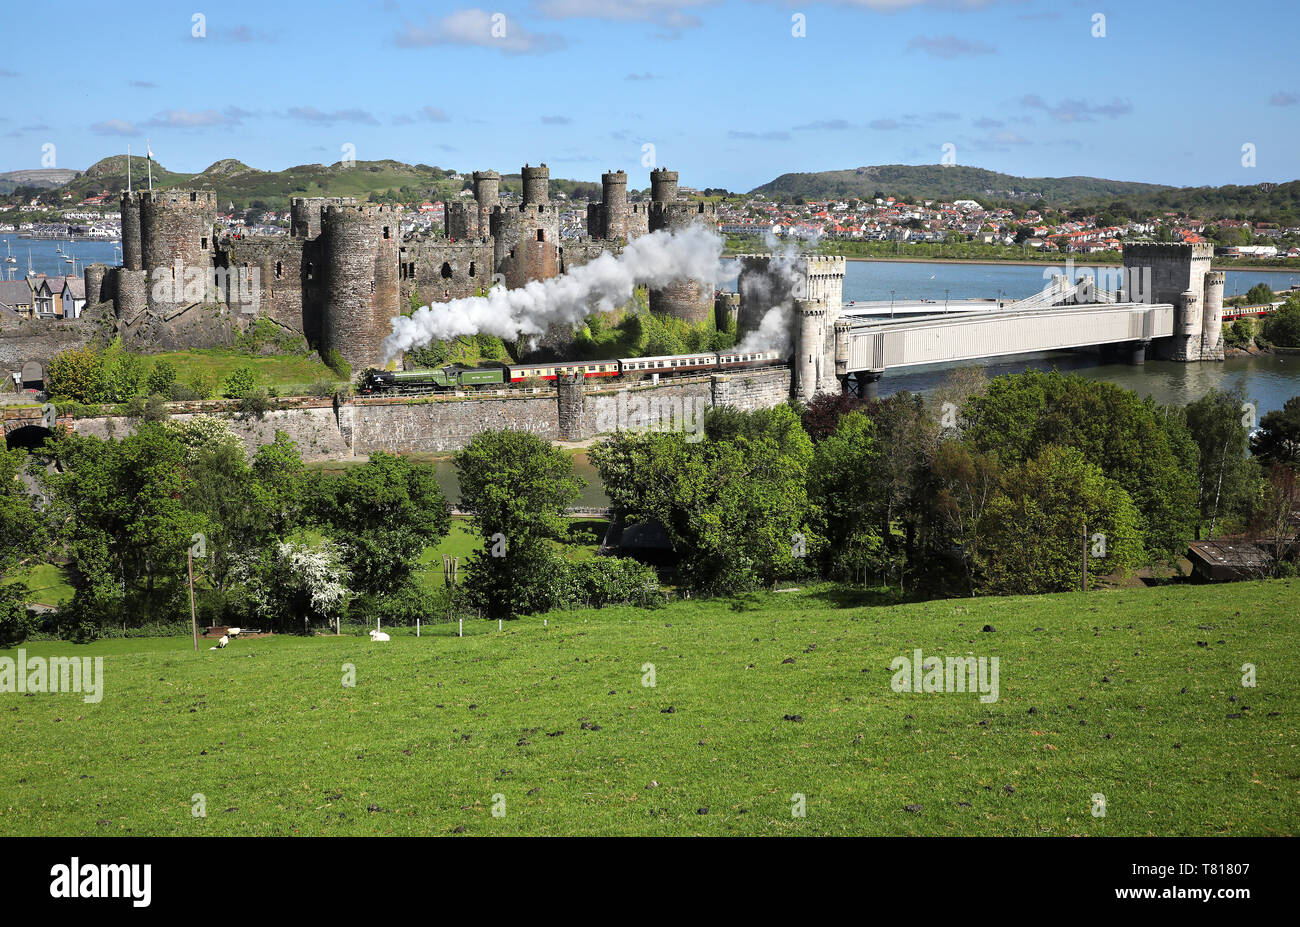 60163 Tornado heads away from Llandudno Jc and passes Conwy Castle. Stock Photo